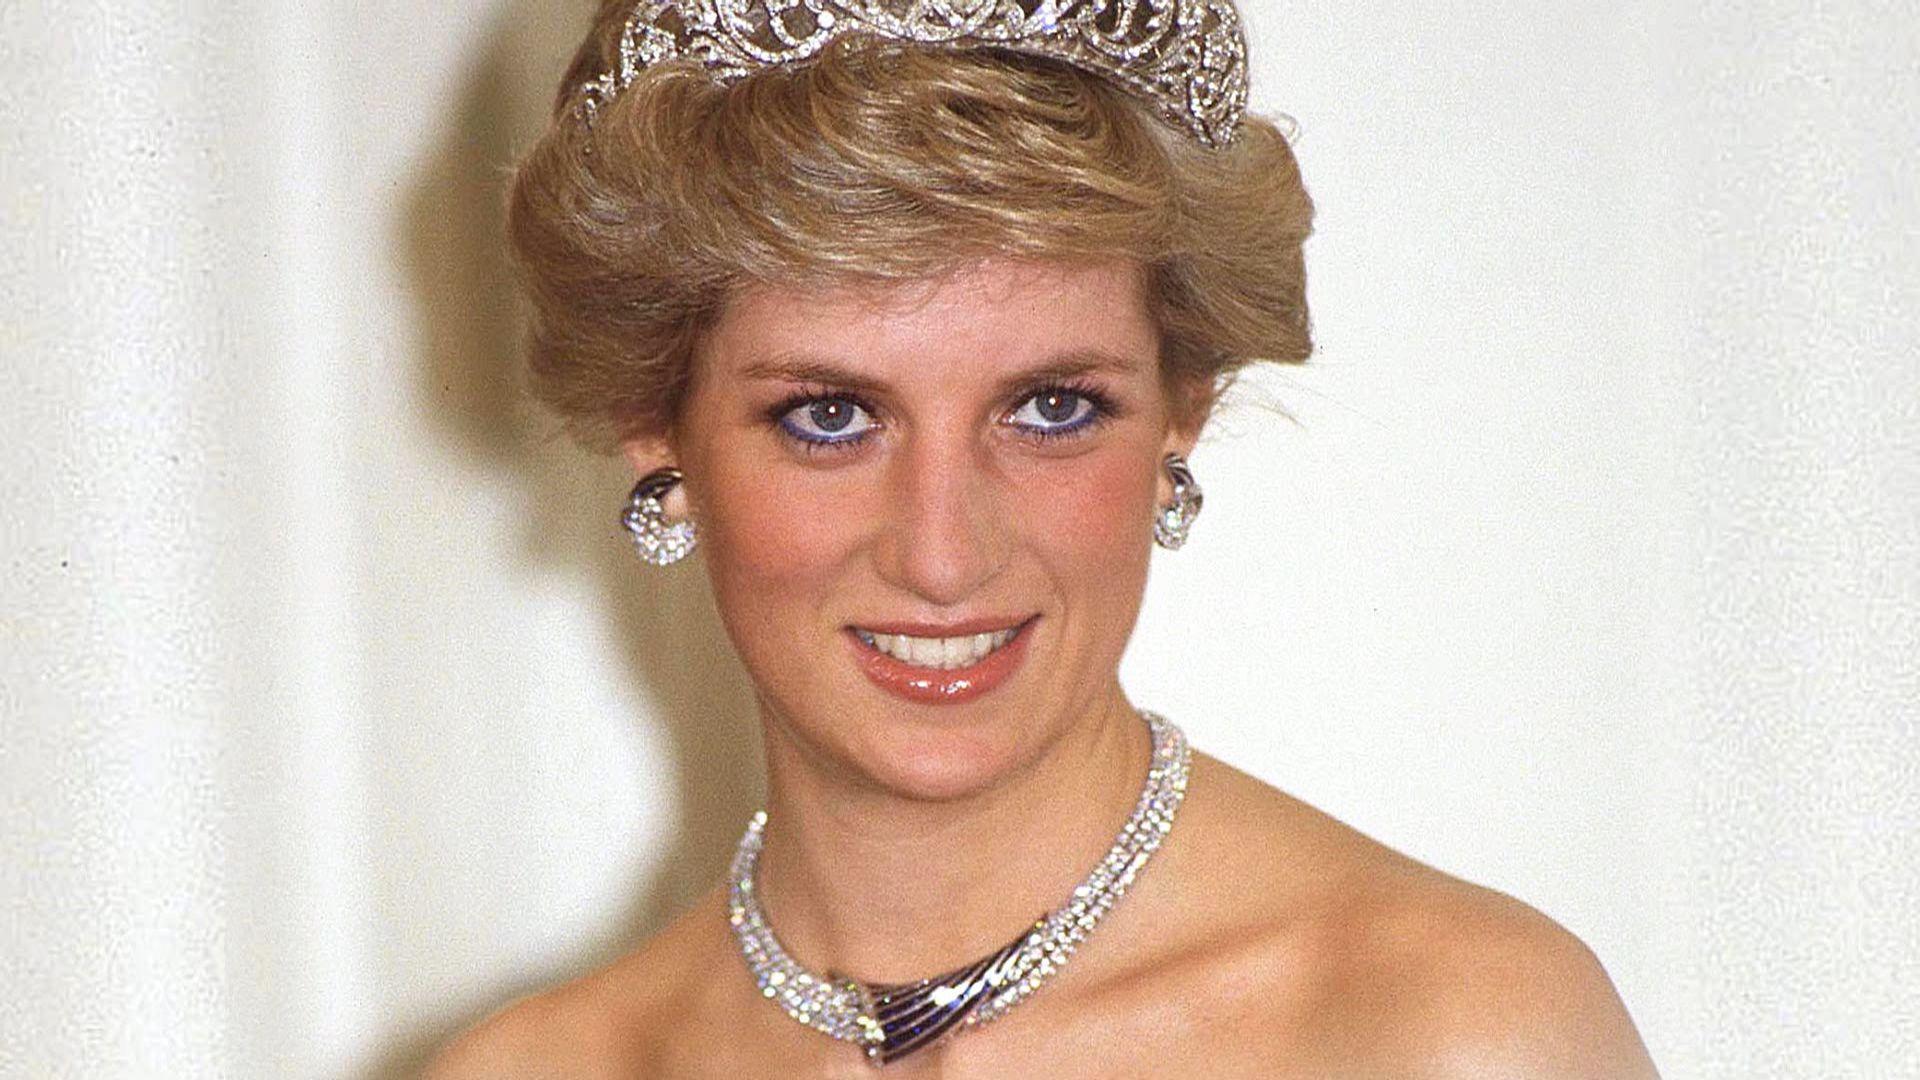 Princess Diana Wallpaper Image Photo Picture Background